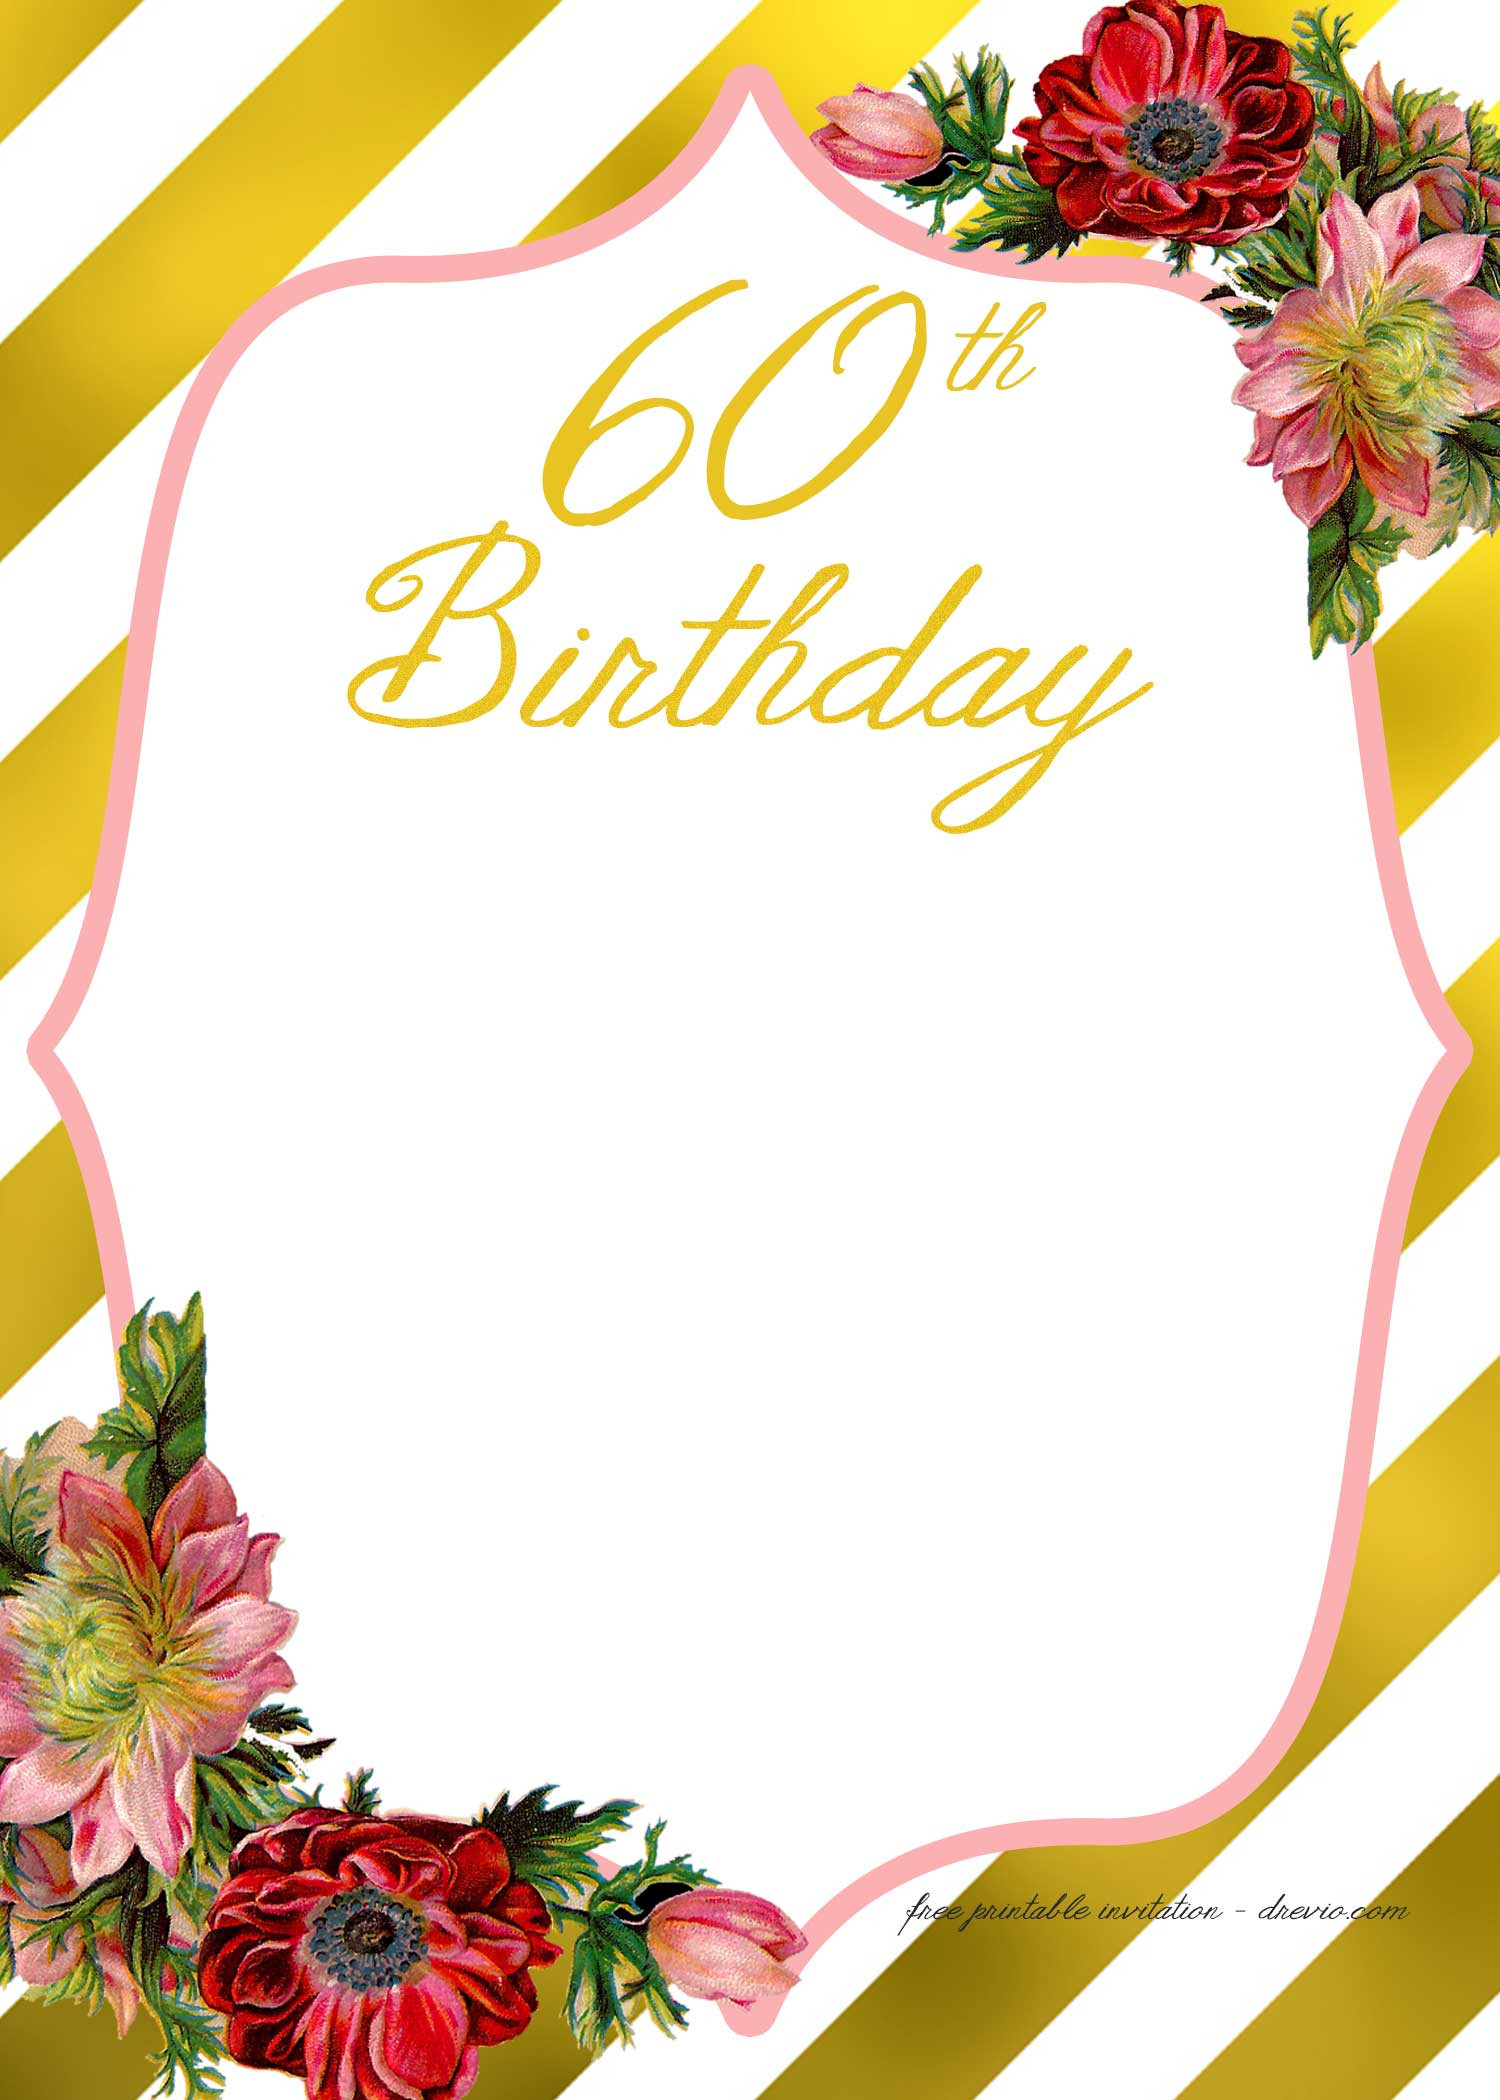 Birthday Invitations Template
 Adult Birthday Invitations Template for 50th years old